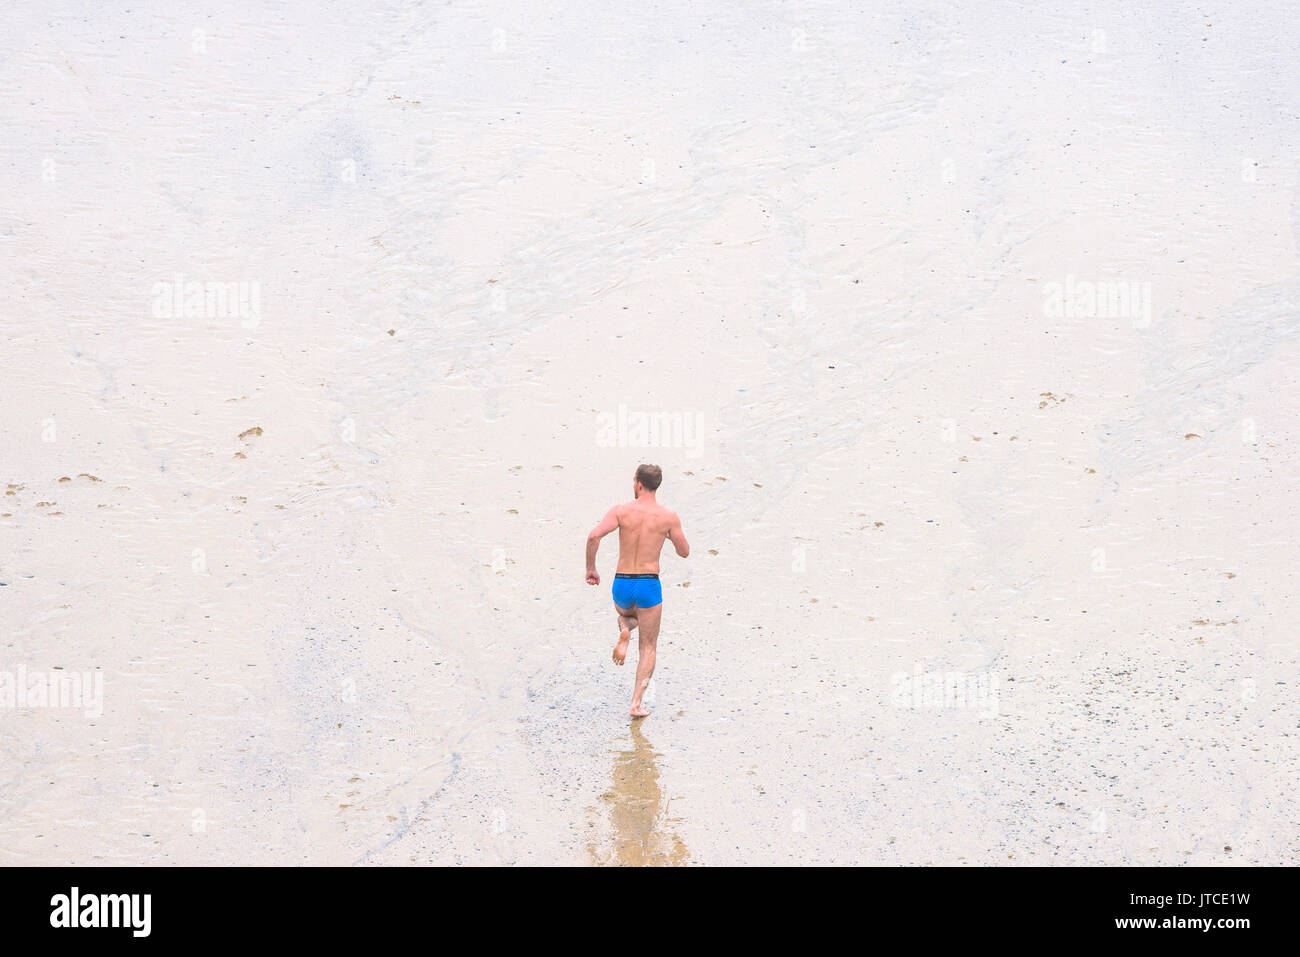 A man running on a beach in his blue Calvin Klein underpants Stock Photo -  Alamy